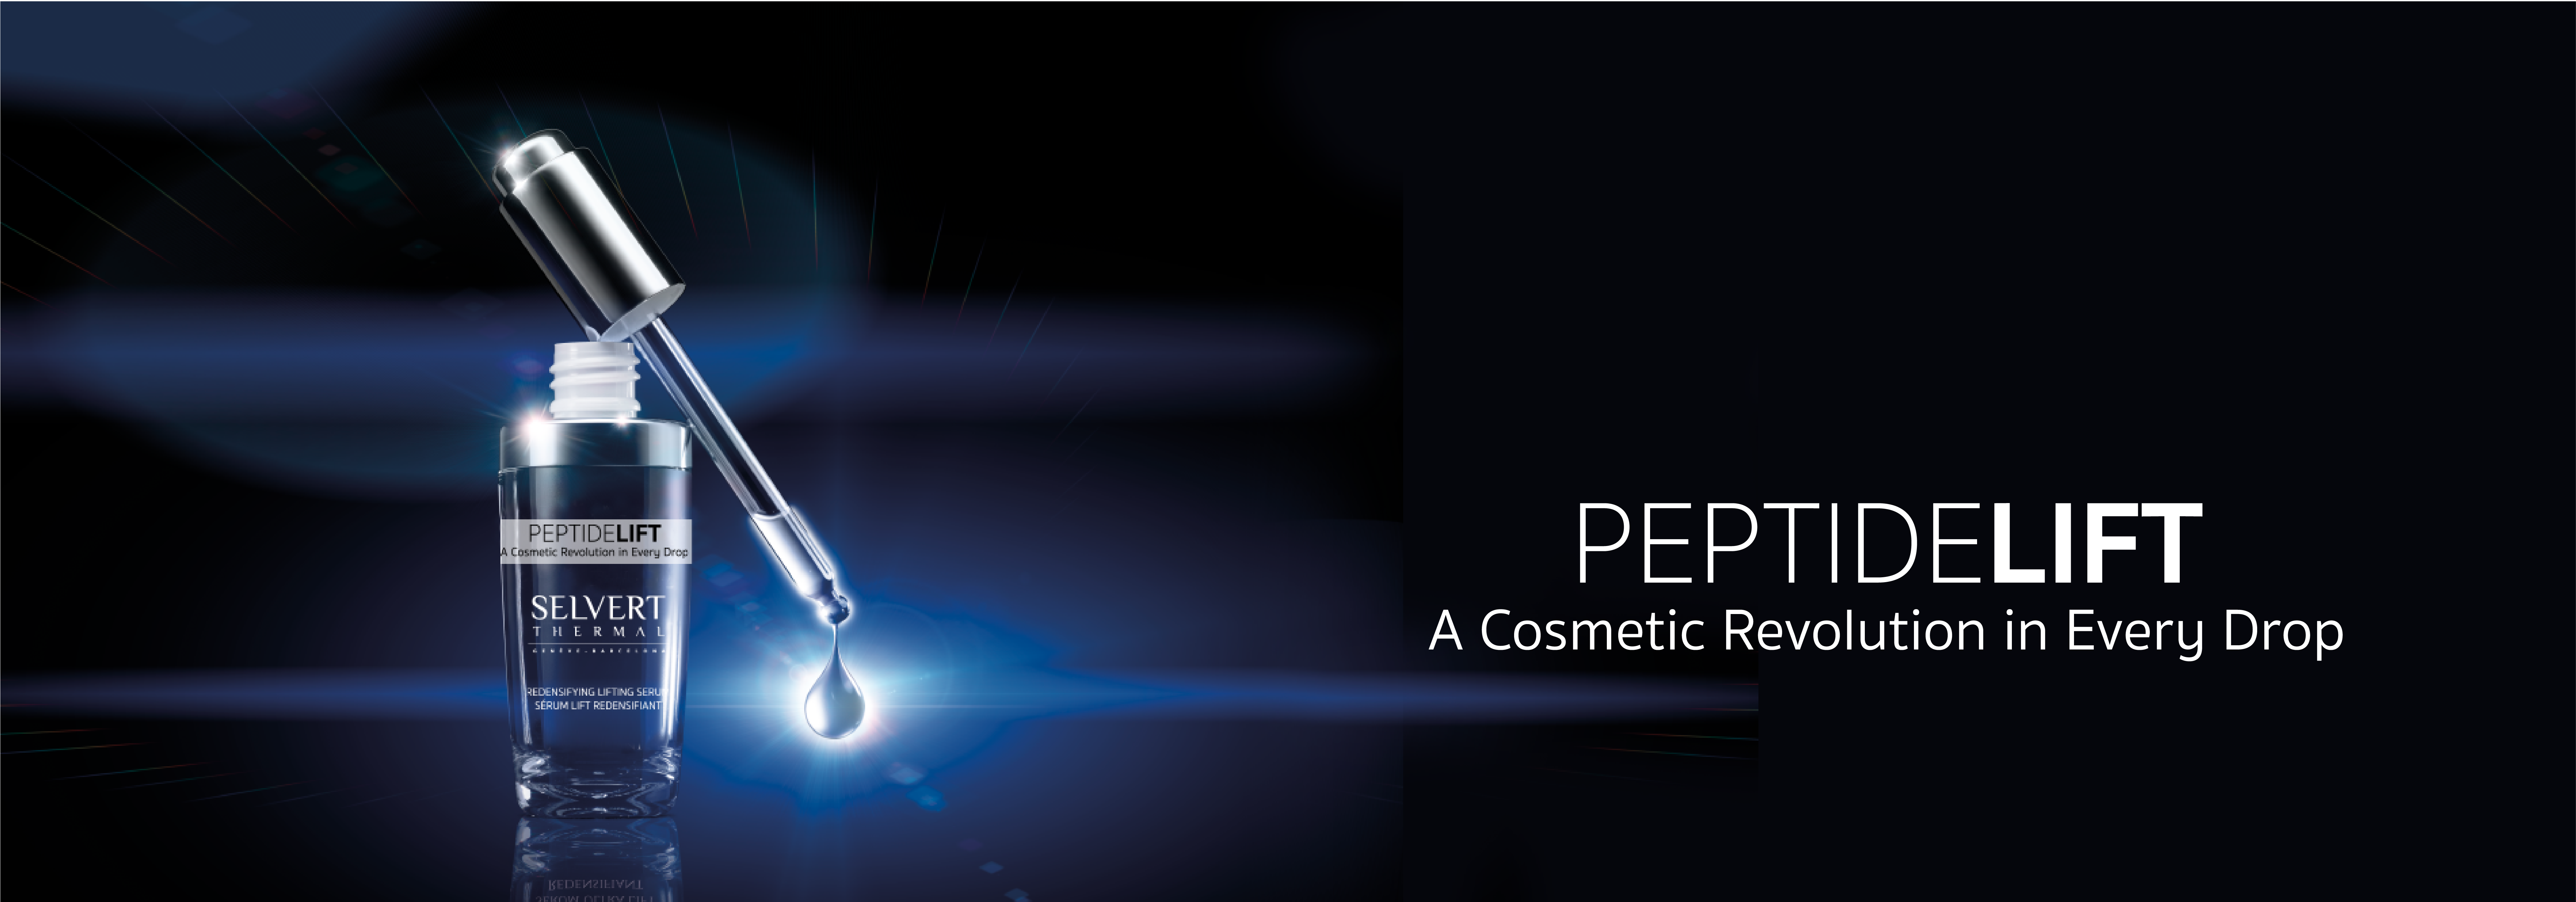 PEPTIDE LIFT <h4 style="text-align: center;">A COSMETIC REVOLUTION IN EVERY DROP</h4>
<p>&nbsp;</p>
<p style="text-align: justify;">Selvert Thermal presents Peptide Lift, a range that challenges the passing of time with rich formulas containing revolutionary generation peptides for an instant, long-lasting lifting effect..</p>
<p style="text-align: justify;">The cell membrane has different types of receptors (locks), which can only be penetrated by a specific type of molecule (key). Known as the &ldquo;lock-key&rdquo; model, it enables us to trigger certain processes within the cell. All the peptides in the Peptide Lift range stimulate different mechanisms which benefit the skin, softening wrinkles, recovering skin elasticity and restoring natural firmness to the skin.</p>
<p style="text-align: justify;">The gift of firm, smooth, hydrated skin. A cosmetic revolution. A prodigious challenge to the ageing process.</p>